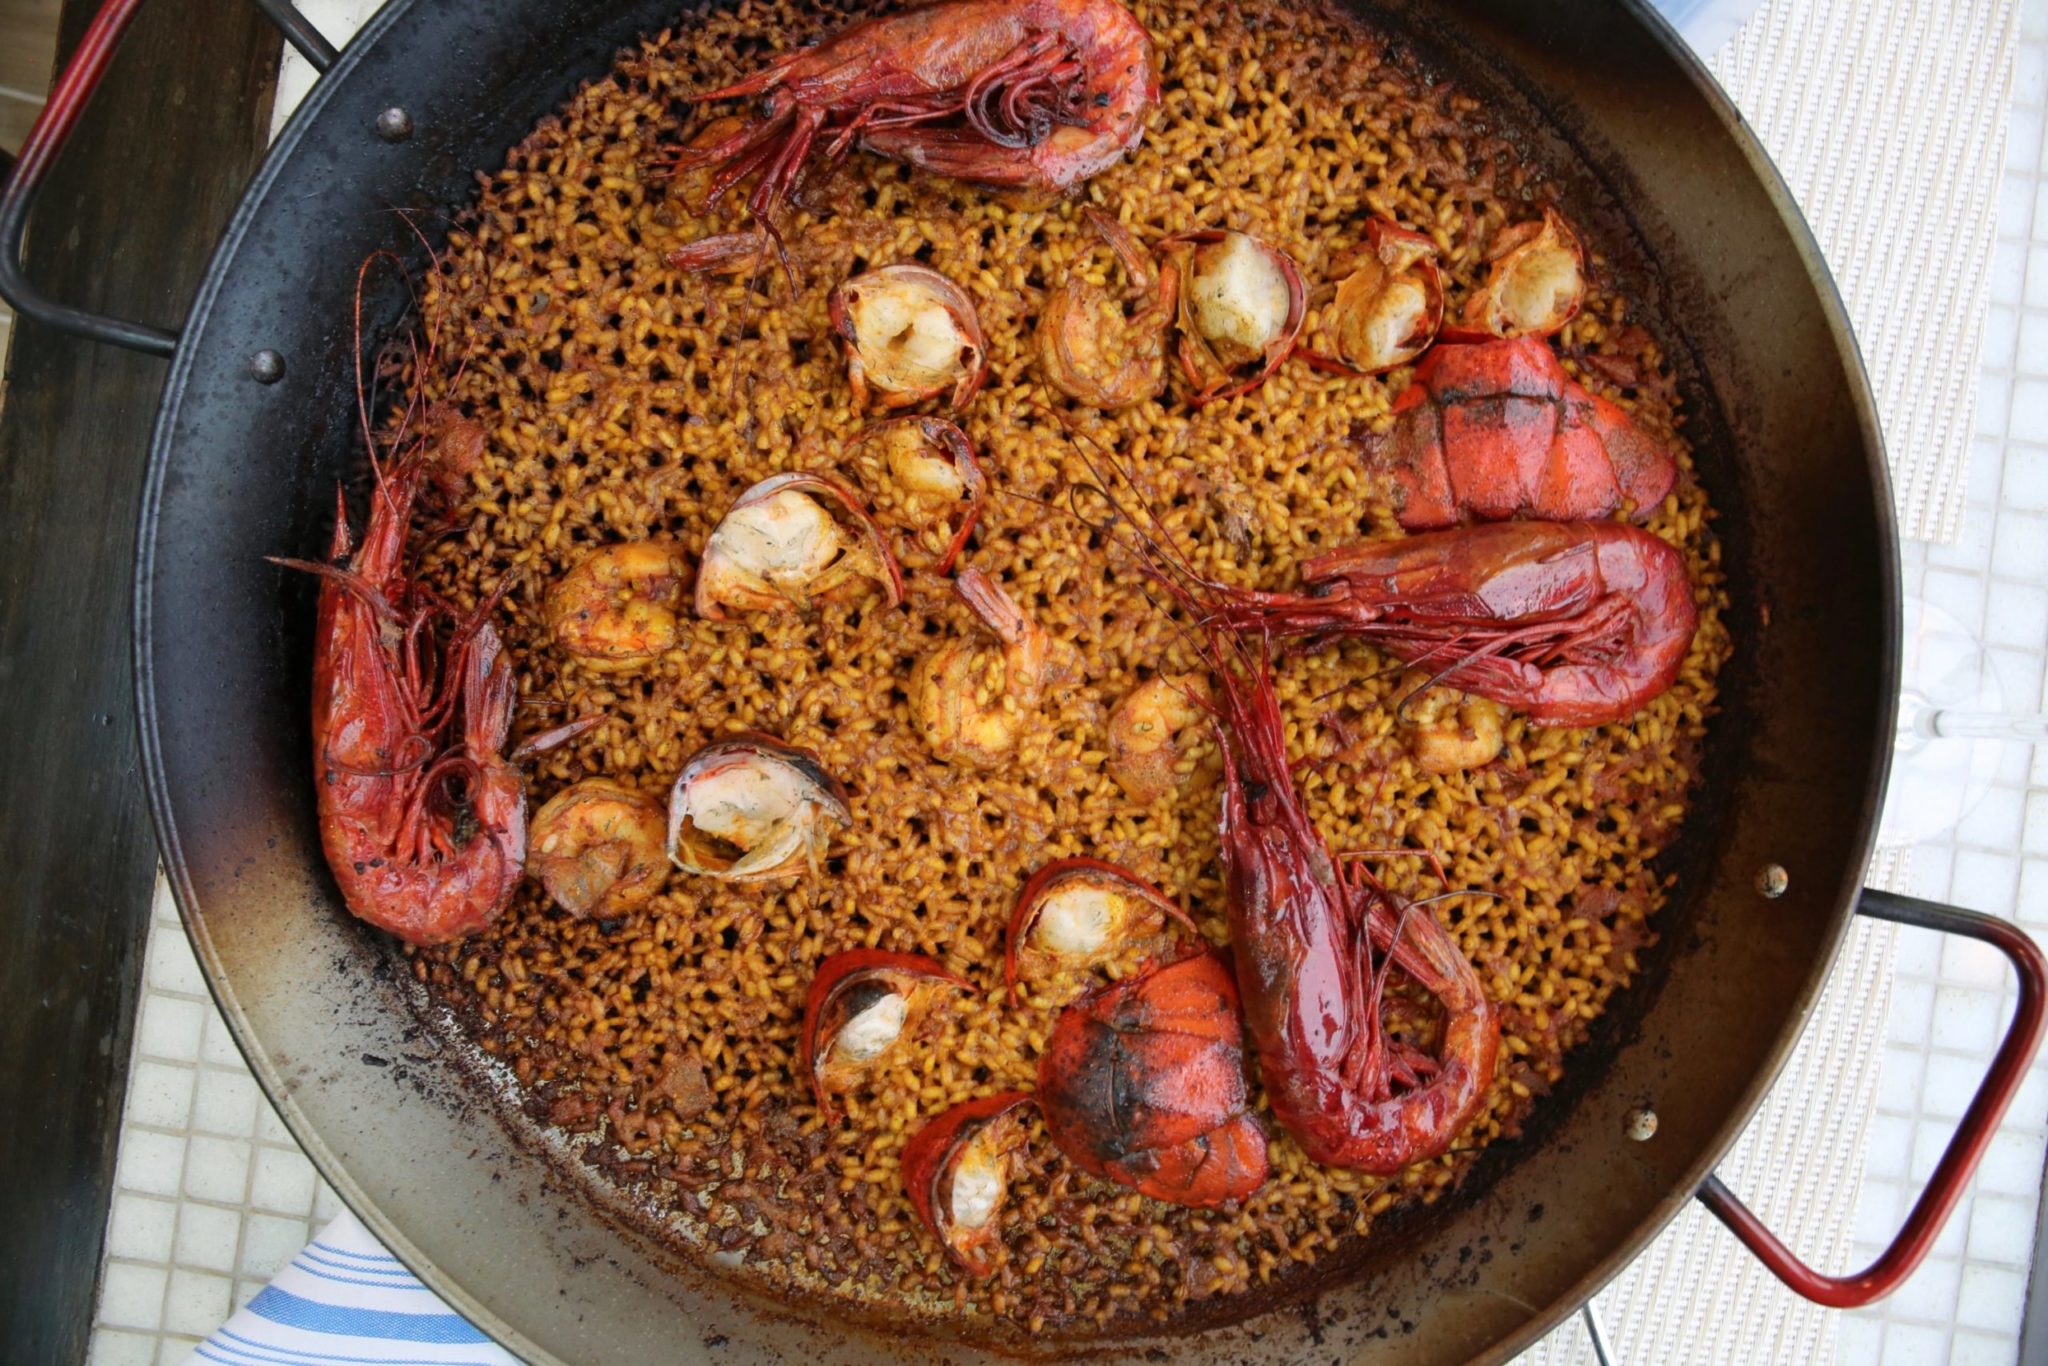 The Dénia-style paella with lobster and red prawn. Photo by Evy Mages.